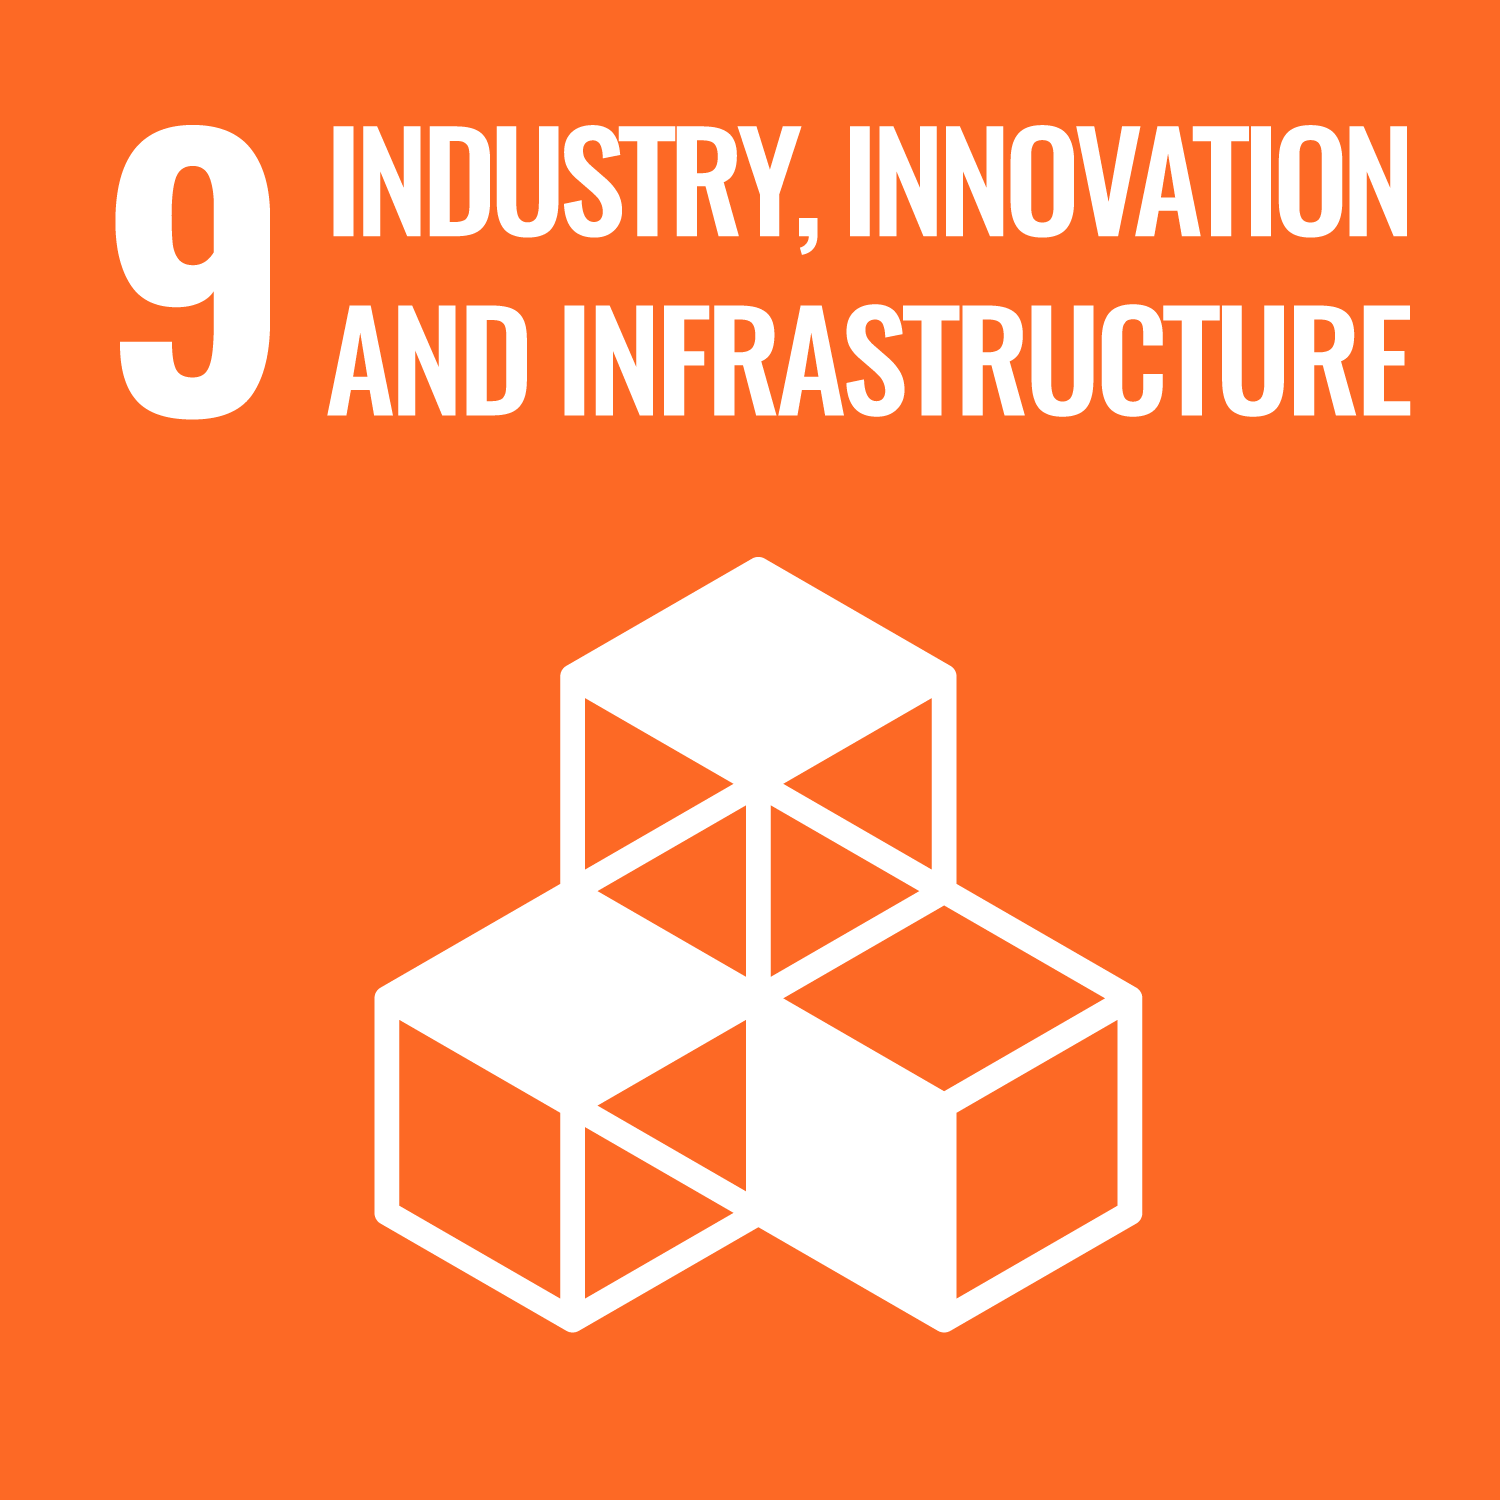 SDG 9 Innovation, industry and infrastructure